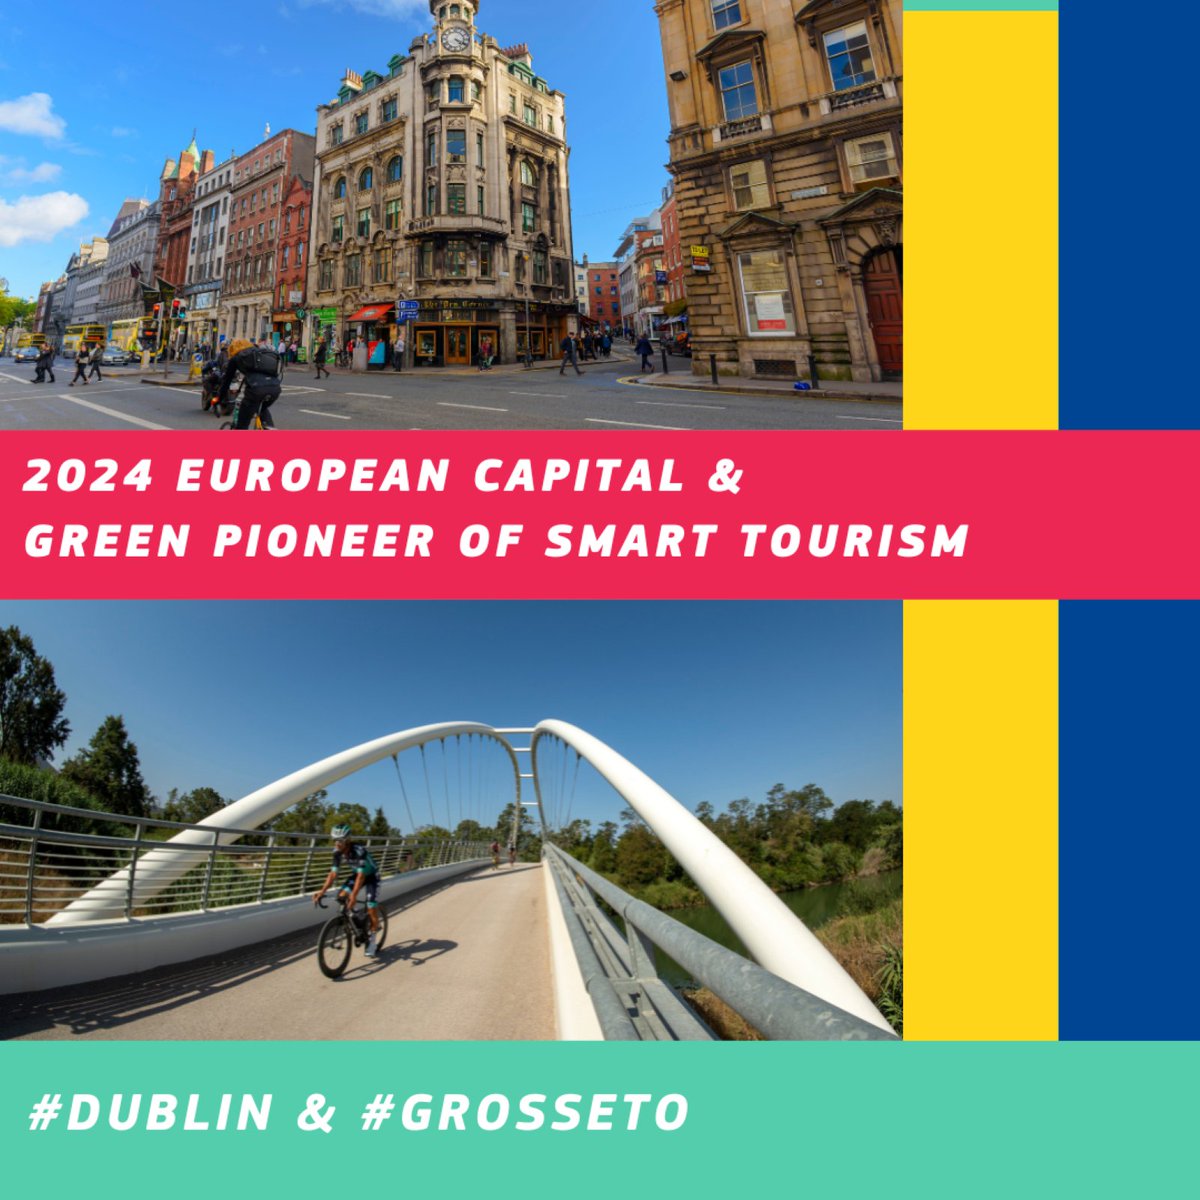 Check out the 2024 European Capital and Green Pioneer of Smart Tourism, #Dublin 🇮🇪 and #Grosseto 🇮🇹! Find out more about the #EUTourismCapital and #EUGreenPioneer initiatives 👉 europa.eu/!Y8PKjh #SmartTourism @DubCityCouncil